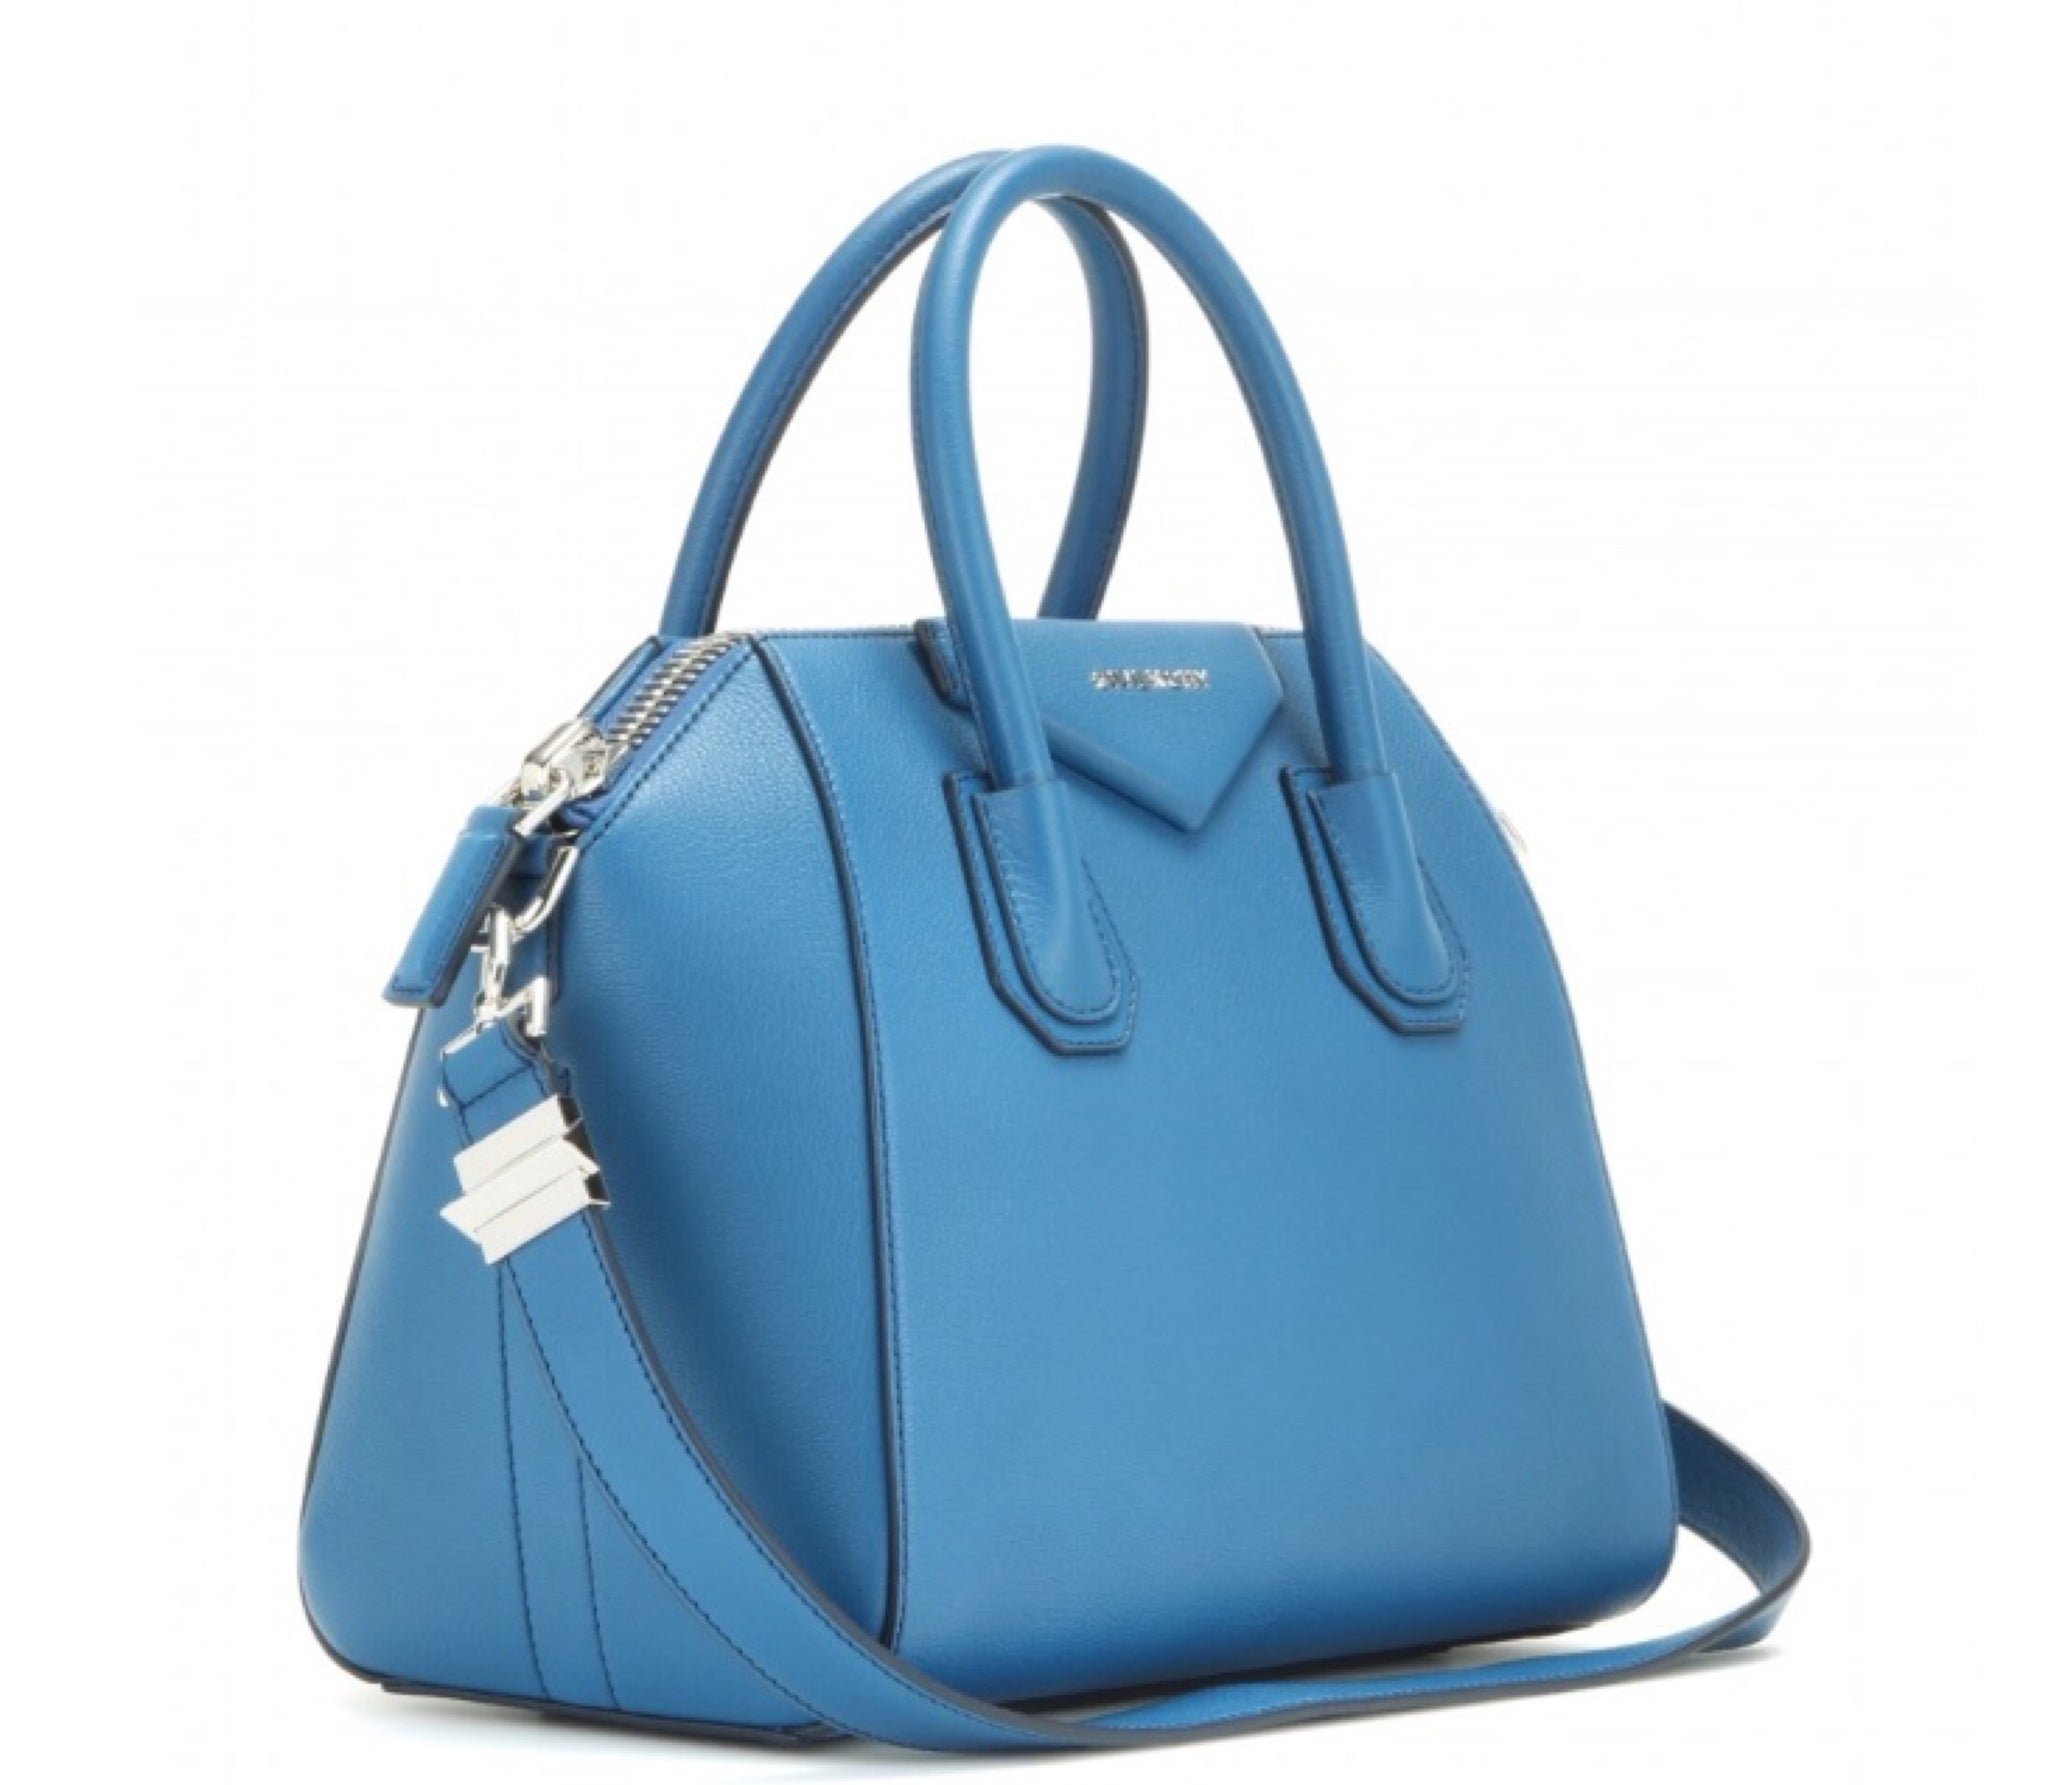 Into the Blue (Givenchy)